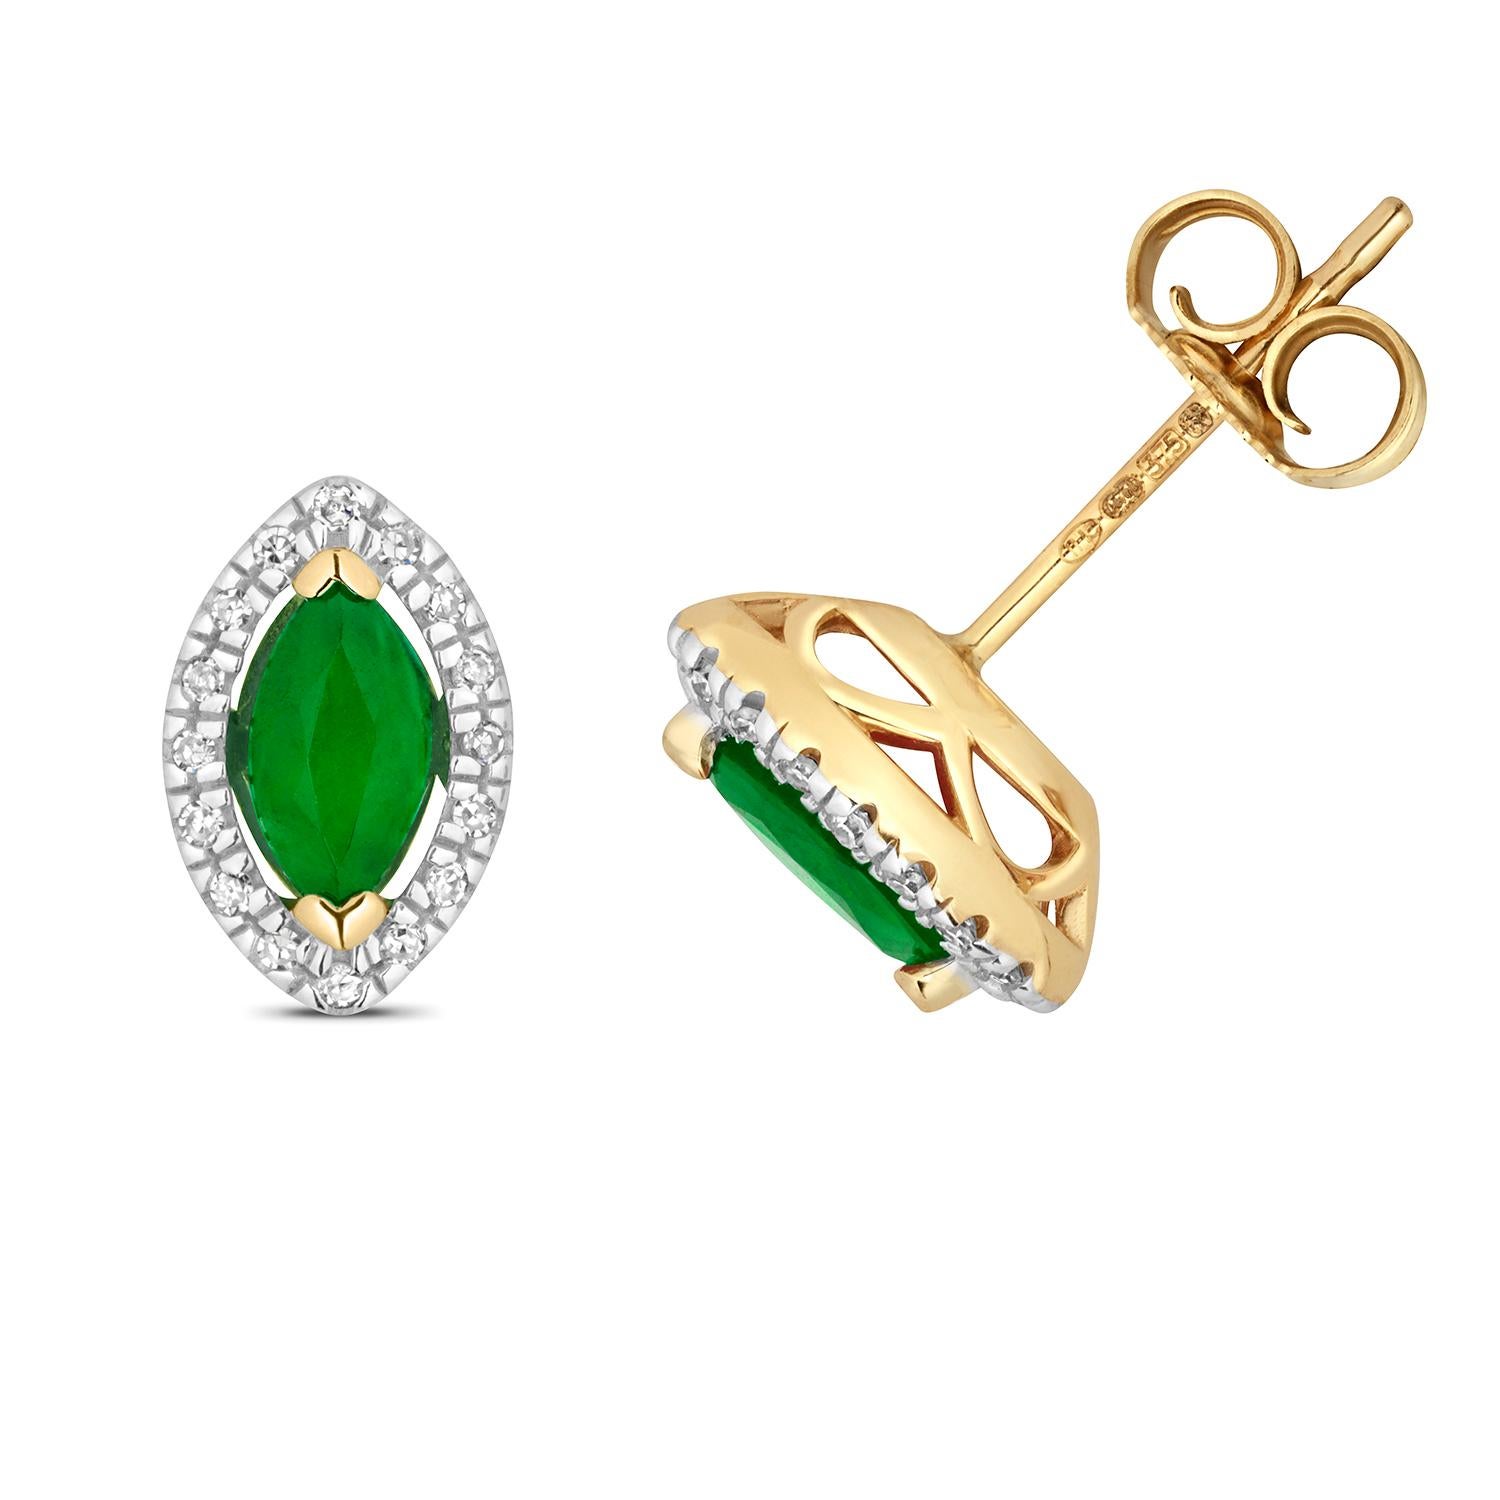 DIAMOND AND EMERALD STUDS

9CT W/G 32SC/0.09CT 2EMD/6X3MM MR

Weight: 1g

Number Of Stones:2+32

Total Carates:0.500+0.090